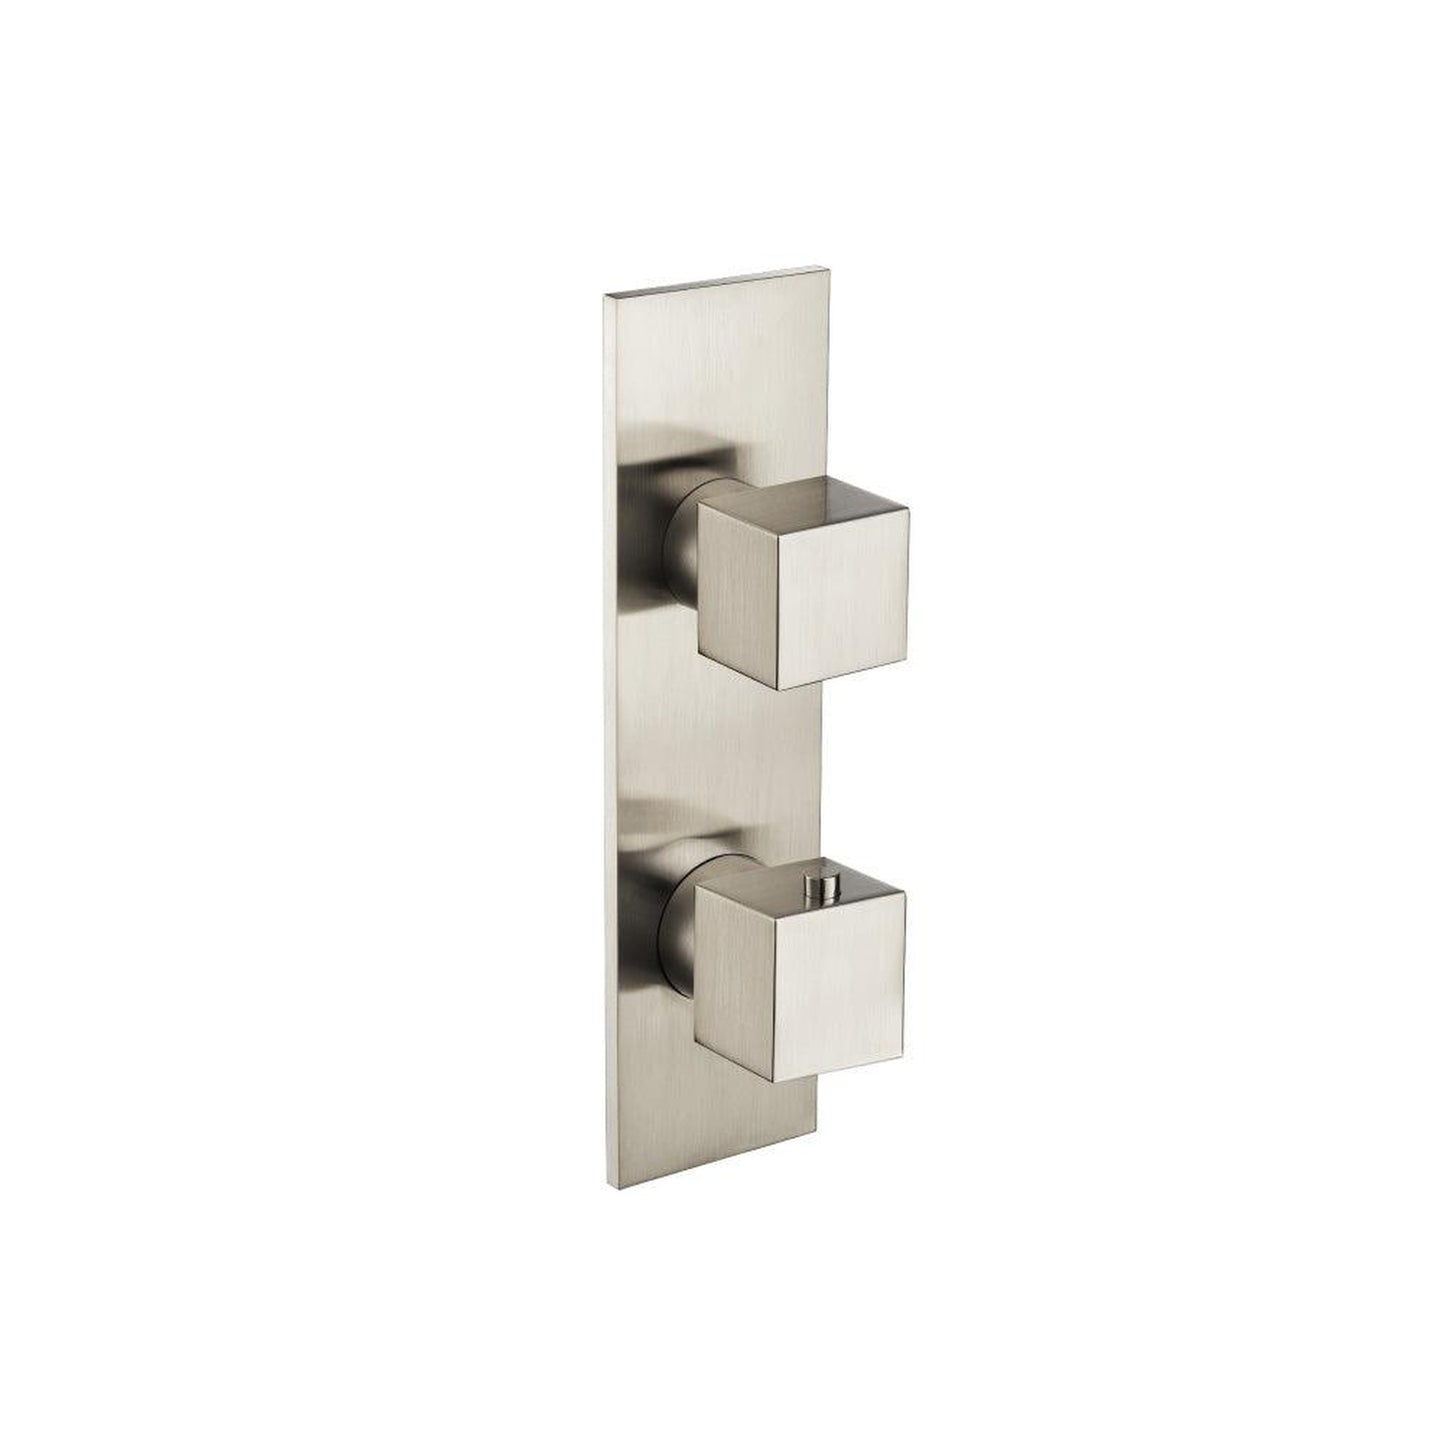 Isenberg Serie 160 3/4" Two Output Thermostatic Shower Valve and Trim in Brushed Nickel